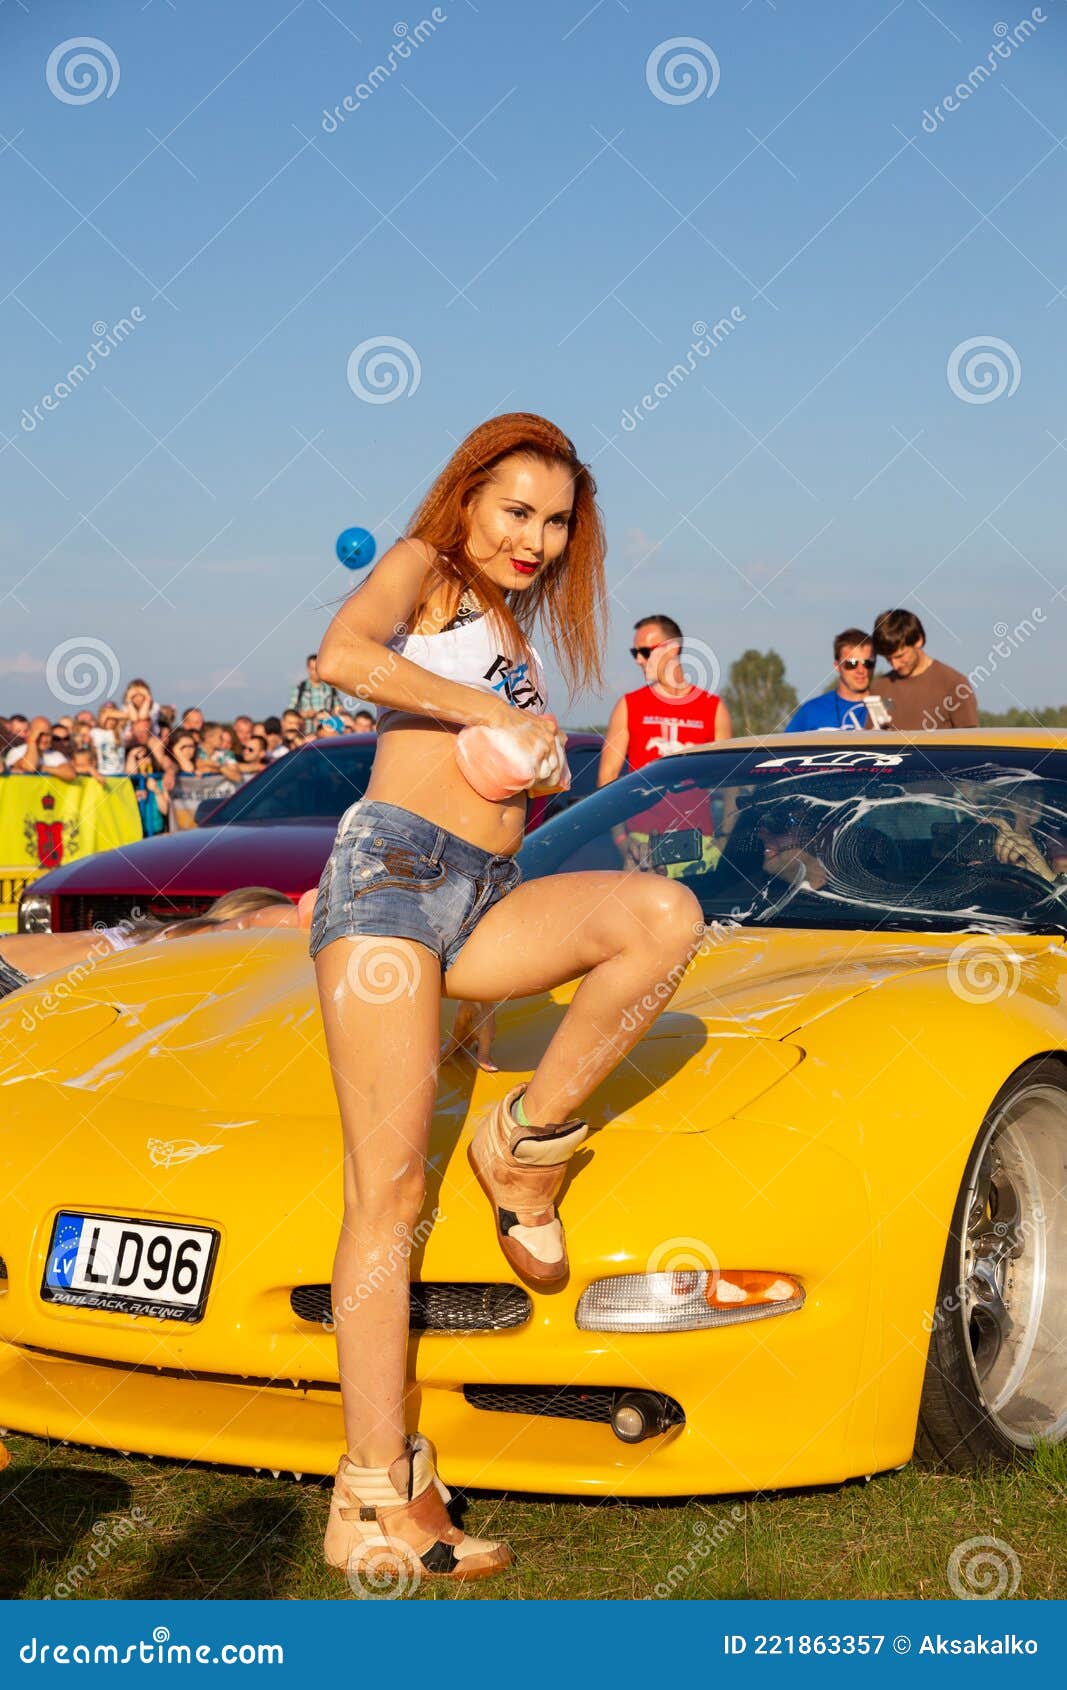 nake girls with race cars hd porn pic